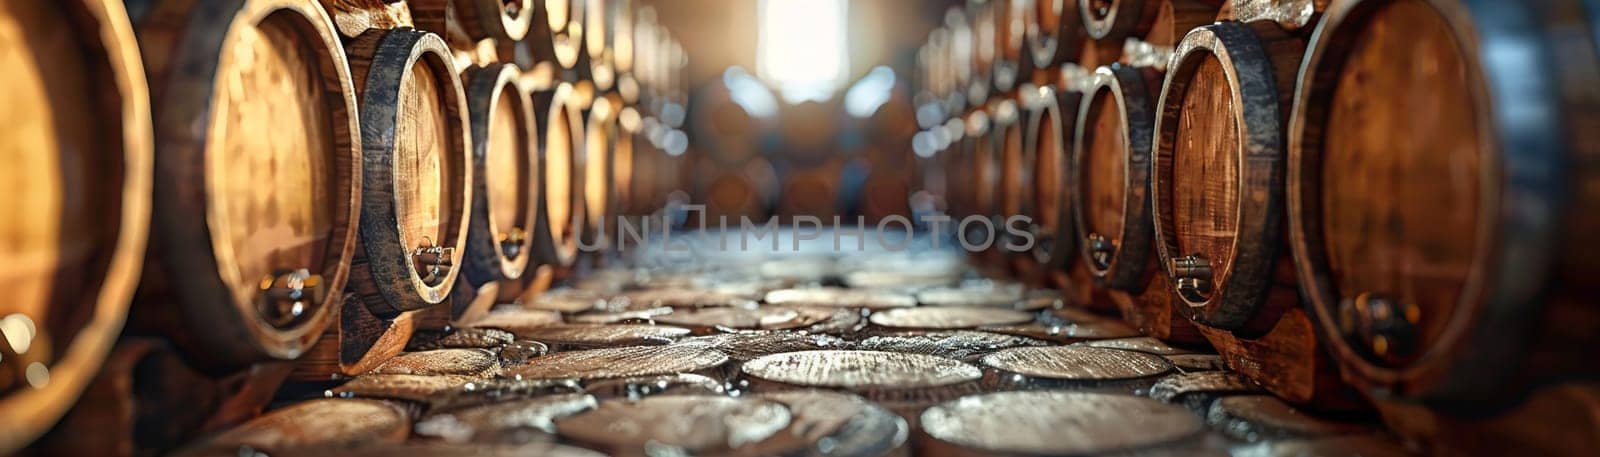 Vintage Winemaking Cellar with Barrels in Soft Focus, The shadowy outlines of wine barrels suggest tradition and the aging of fine wines.